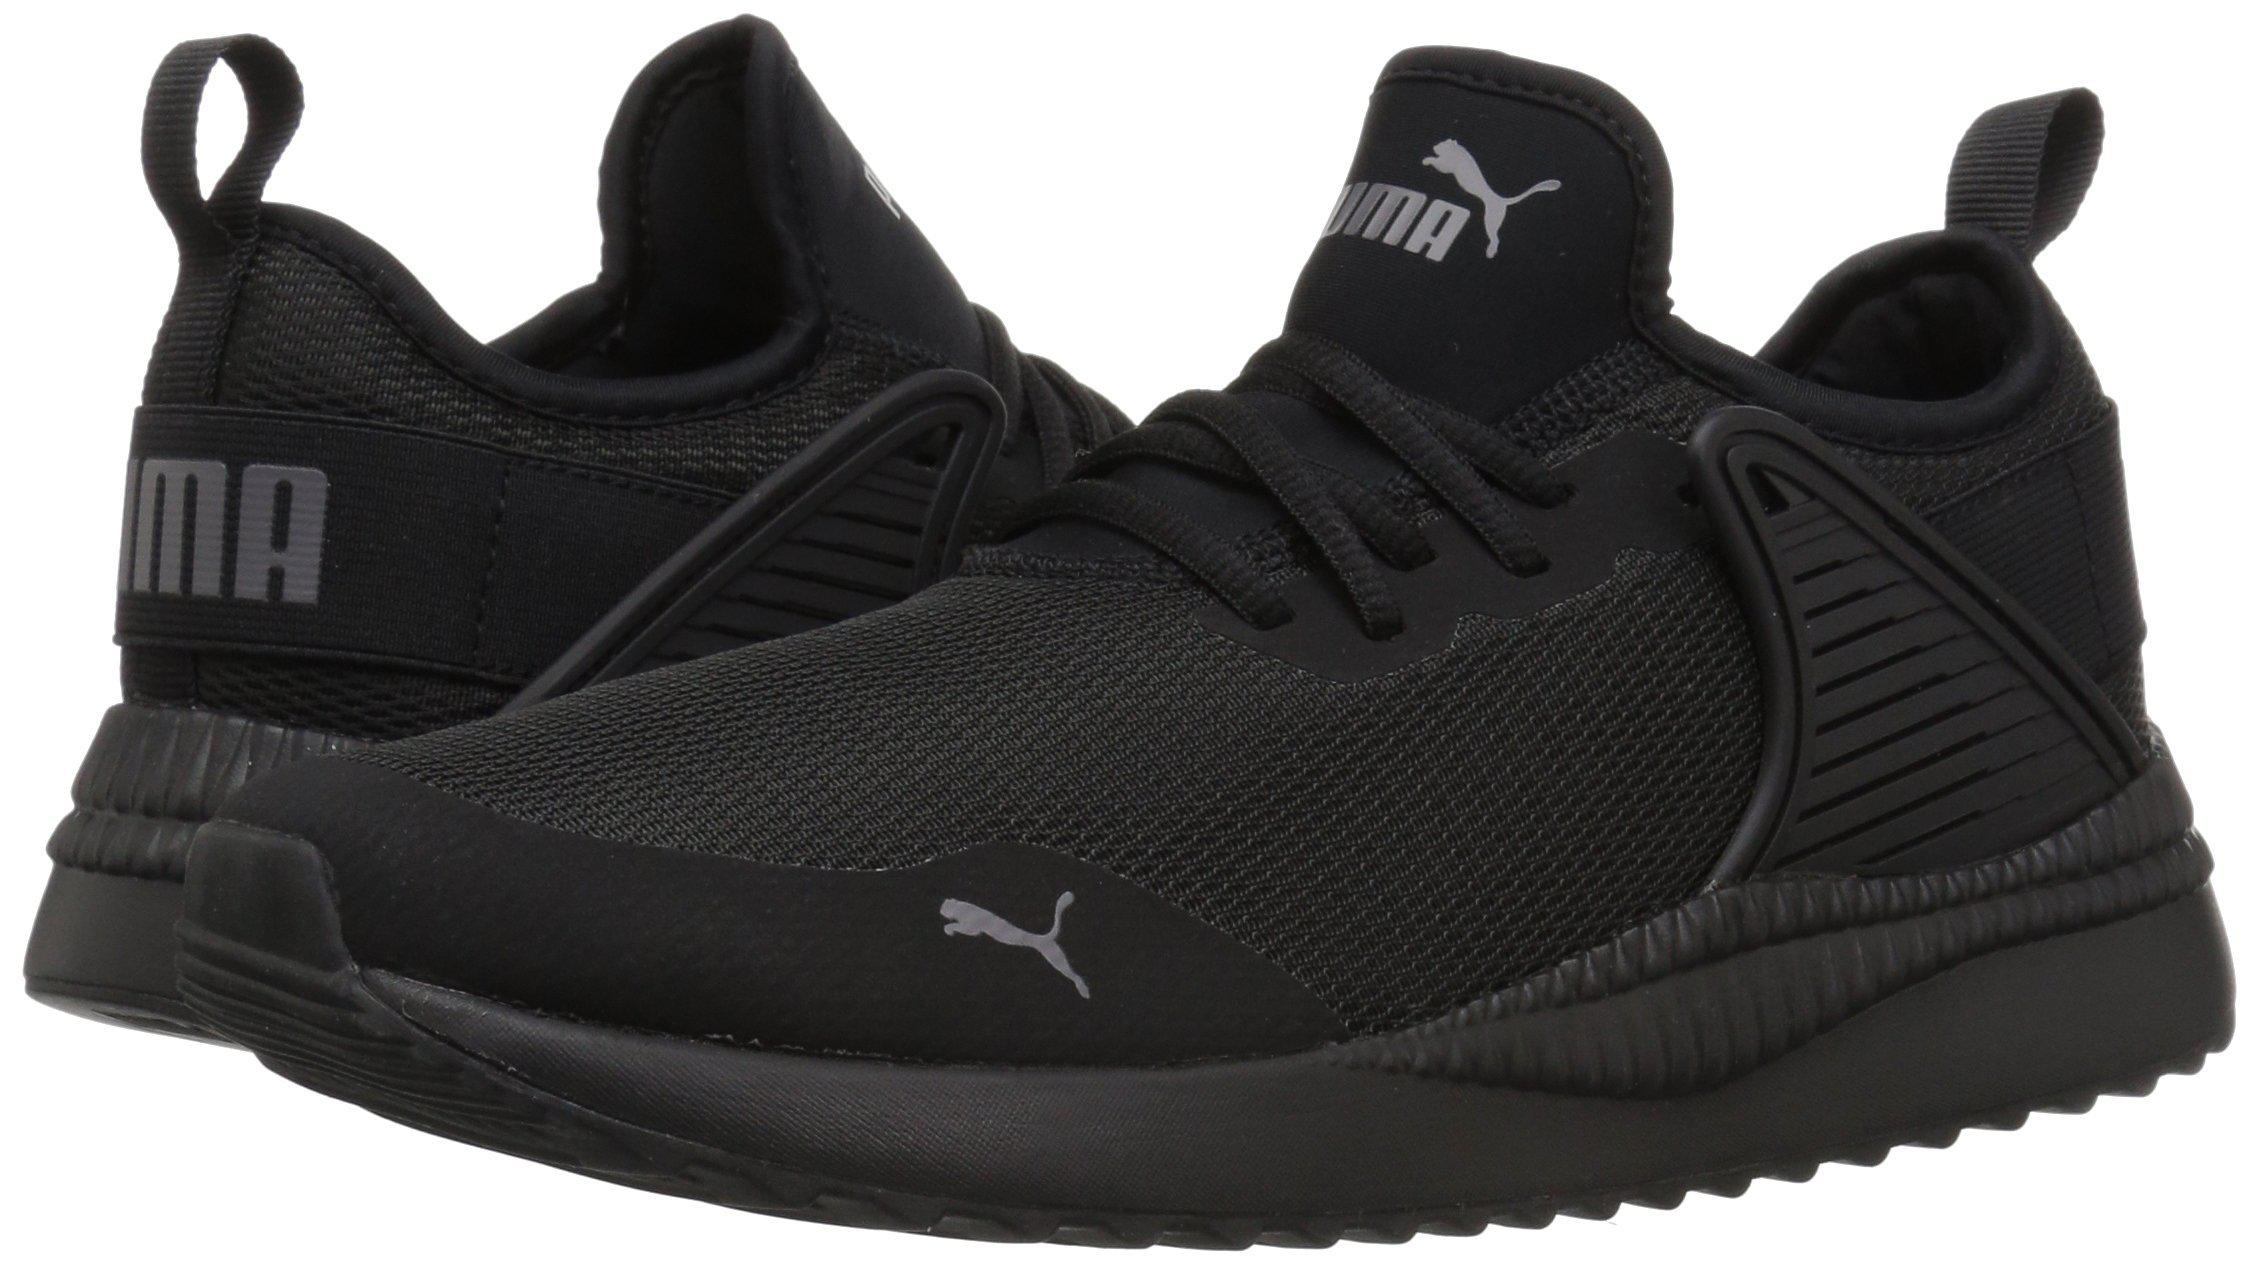 puma pacer cage mens trainers